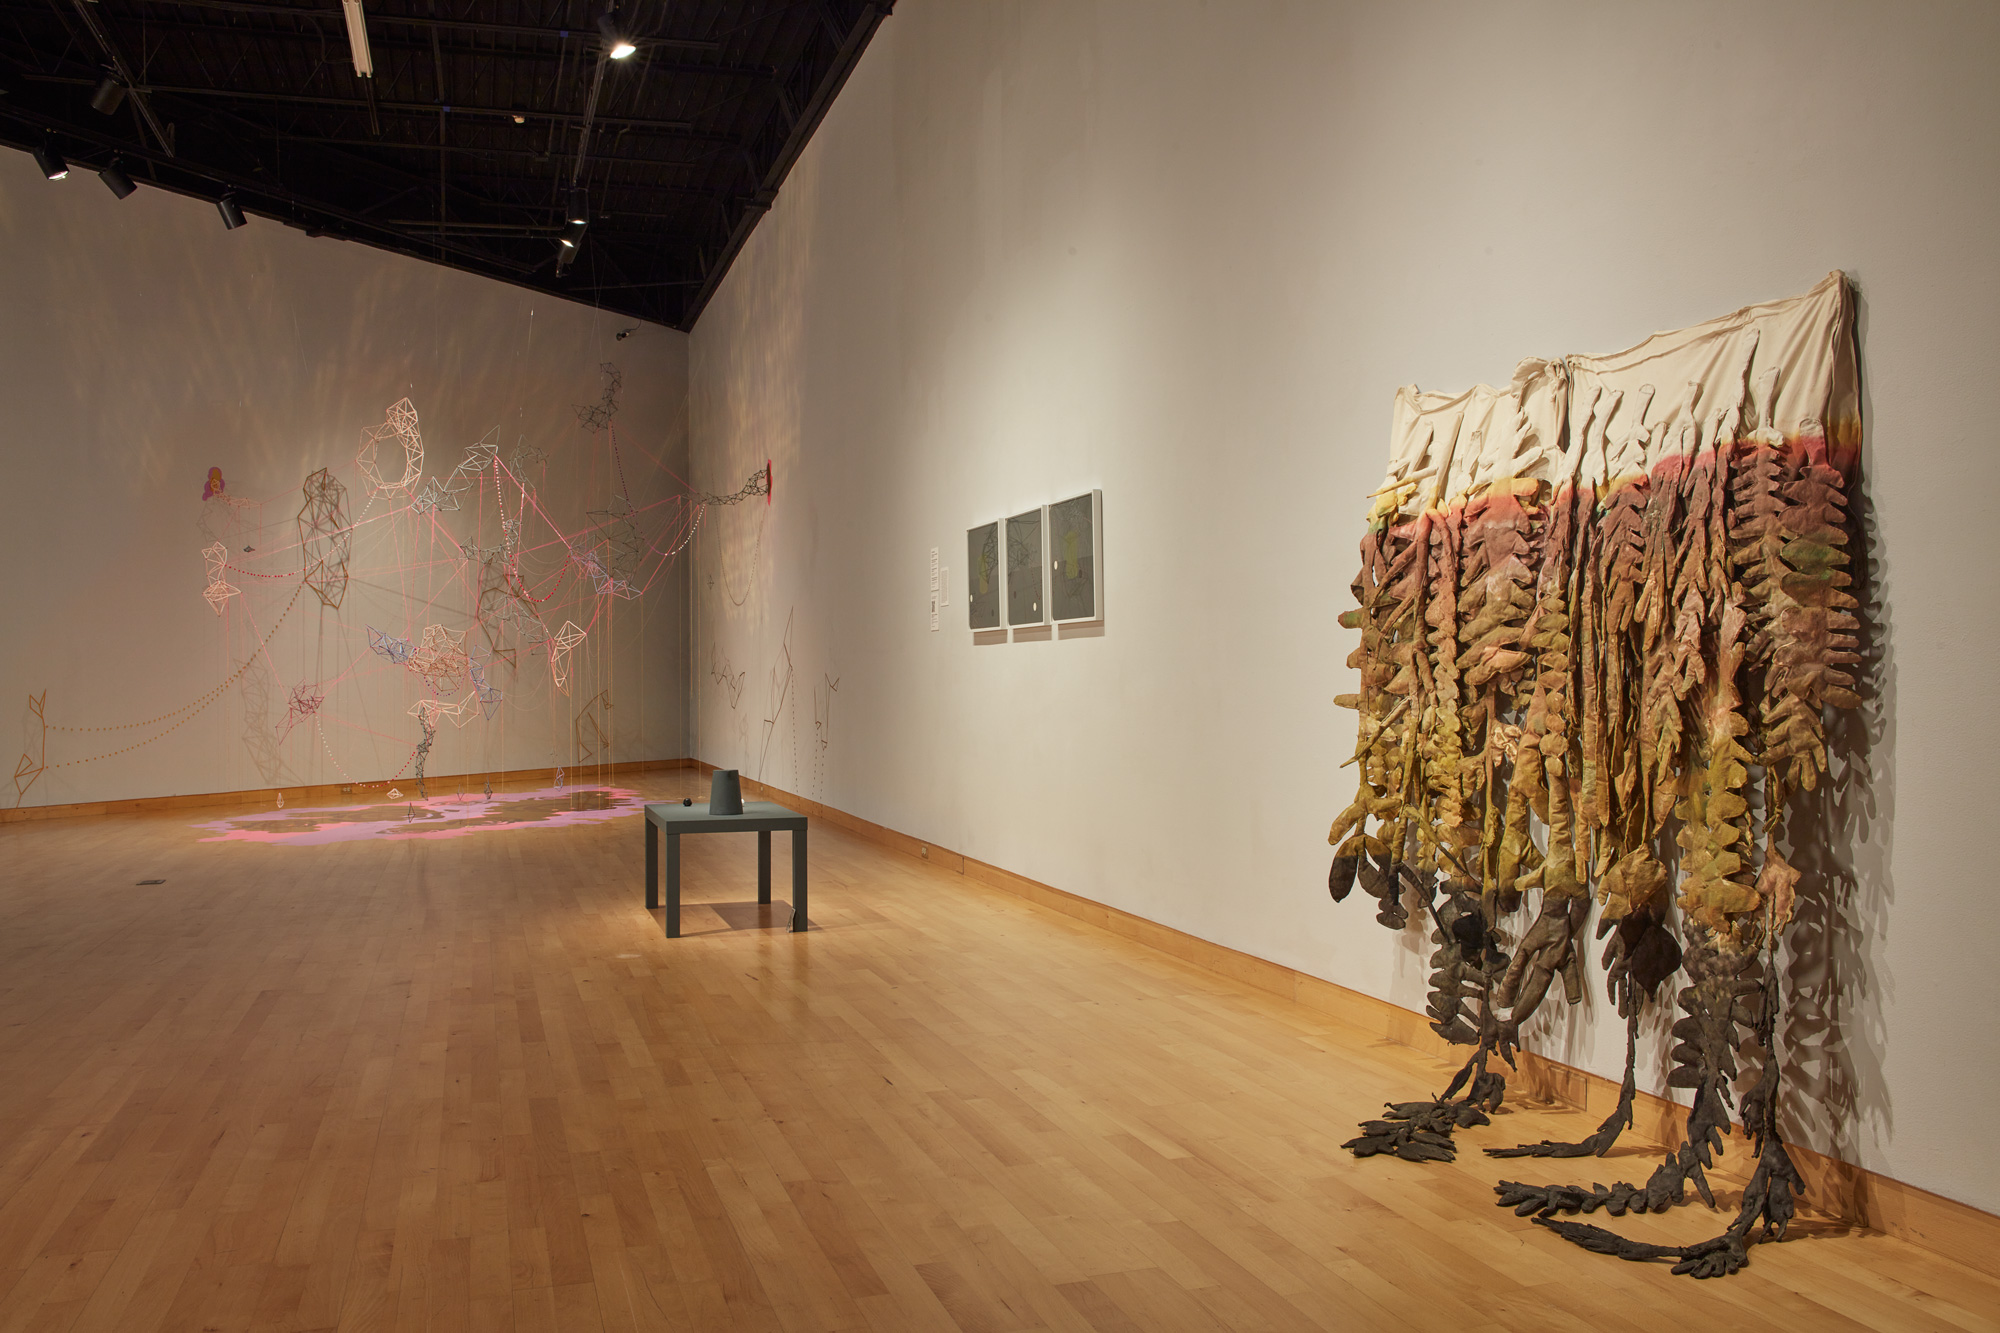 Installation view of Skyway 20/21 exhibition at USF Contemporary Art Museum. Left to right: works by Casey McDonough, Ry McCollough, and Cynthia Mason. Photo: Will Lytch.